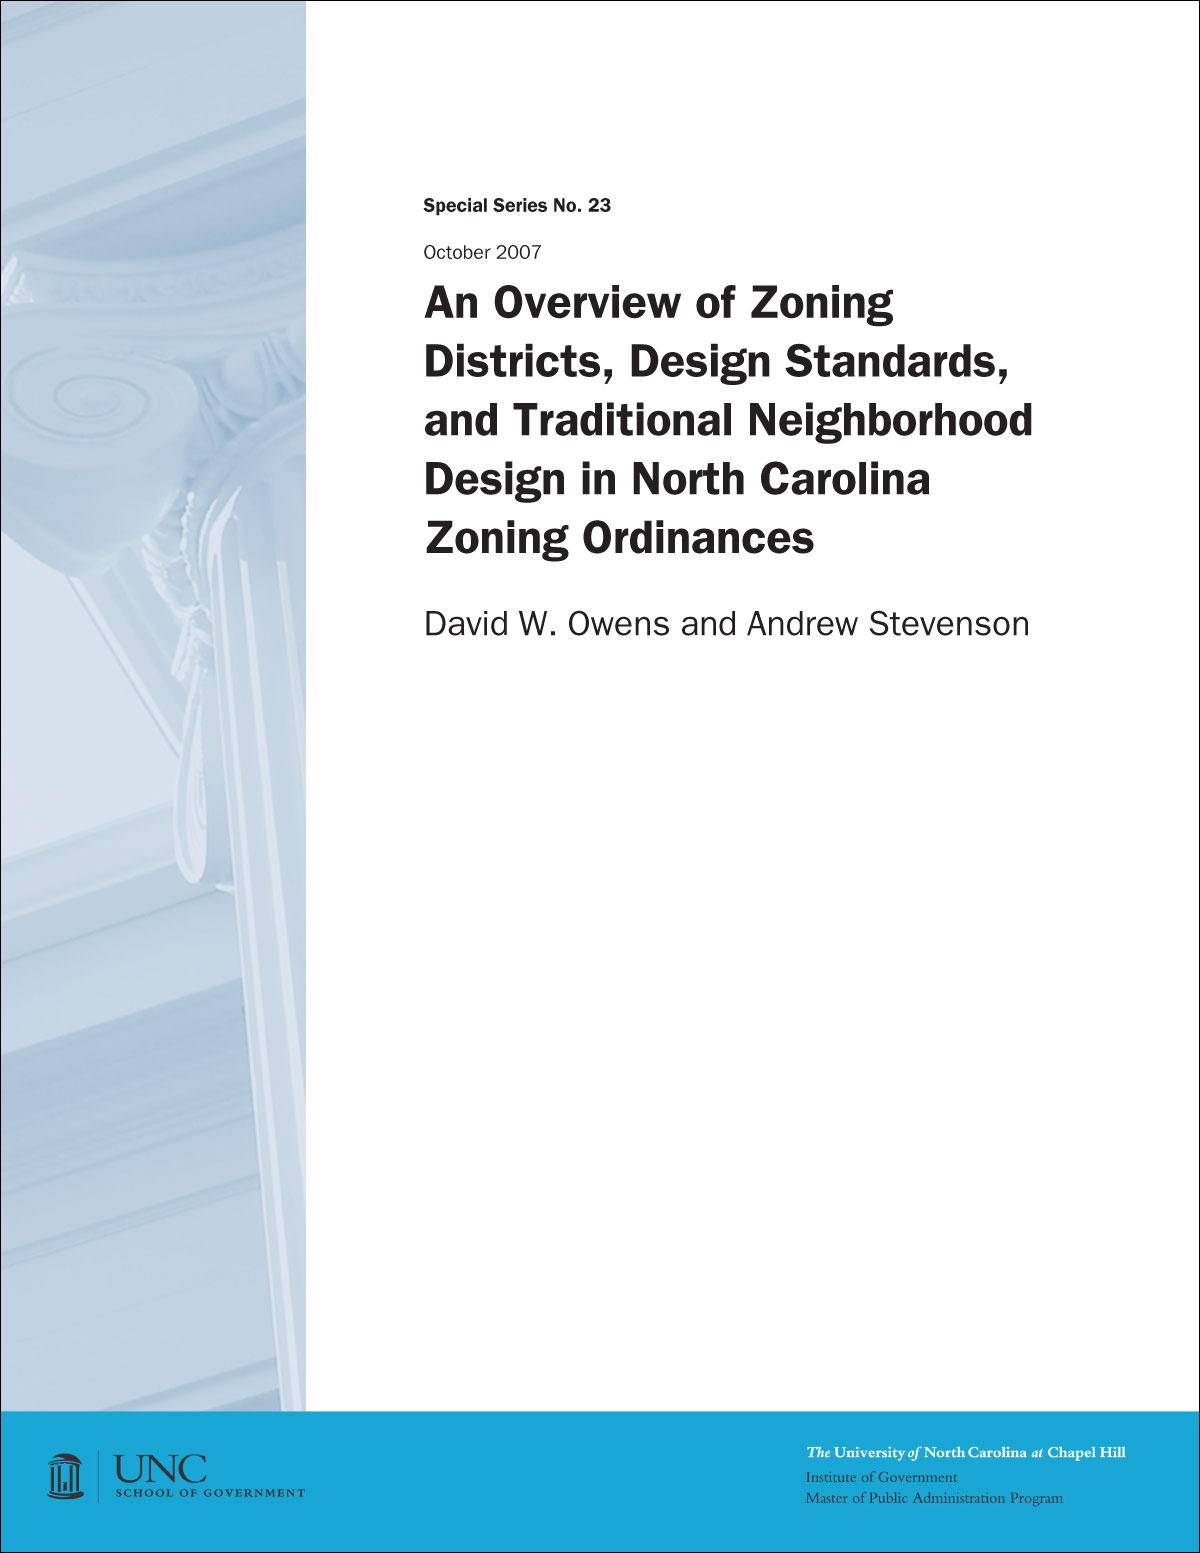 An Overview of Zoning Districts, Design Standards, and Traditional Neighborhood Design in North Carolina Zoning Ordinances, Special Series No. 23, October 2007